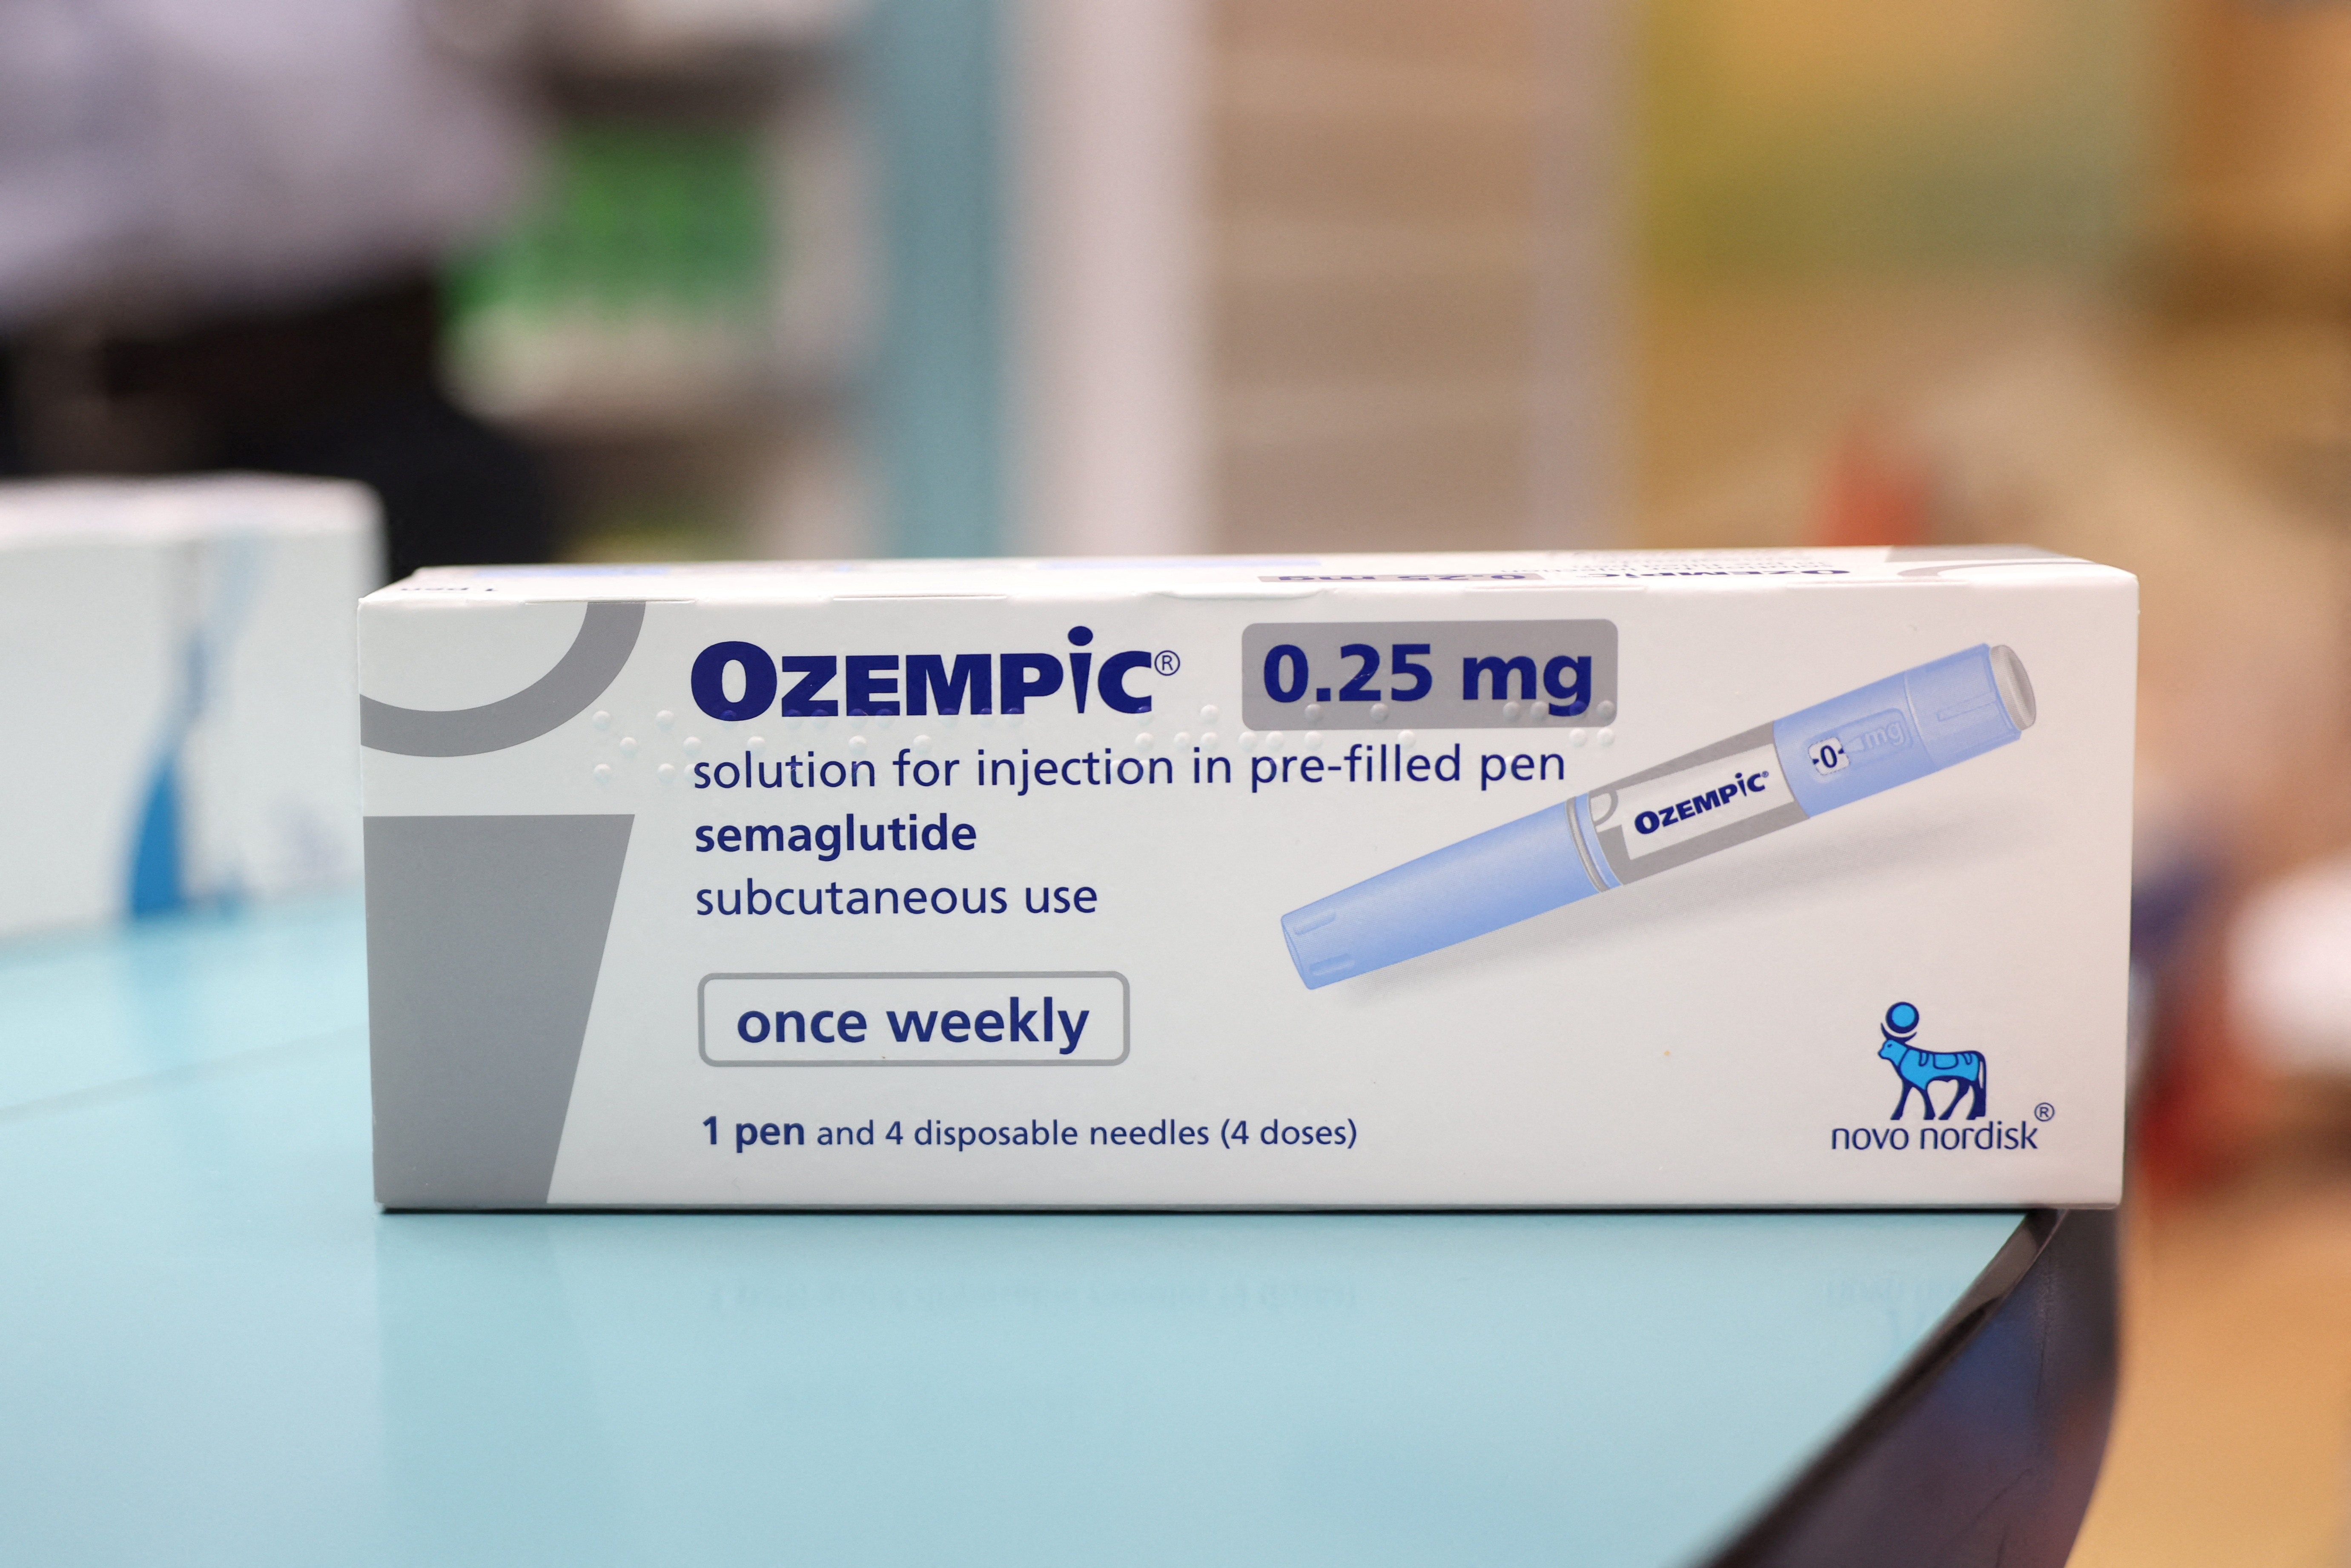 A box of Ozempic made by Novo Nordisk is seen at a pharmacy in London